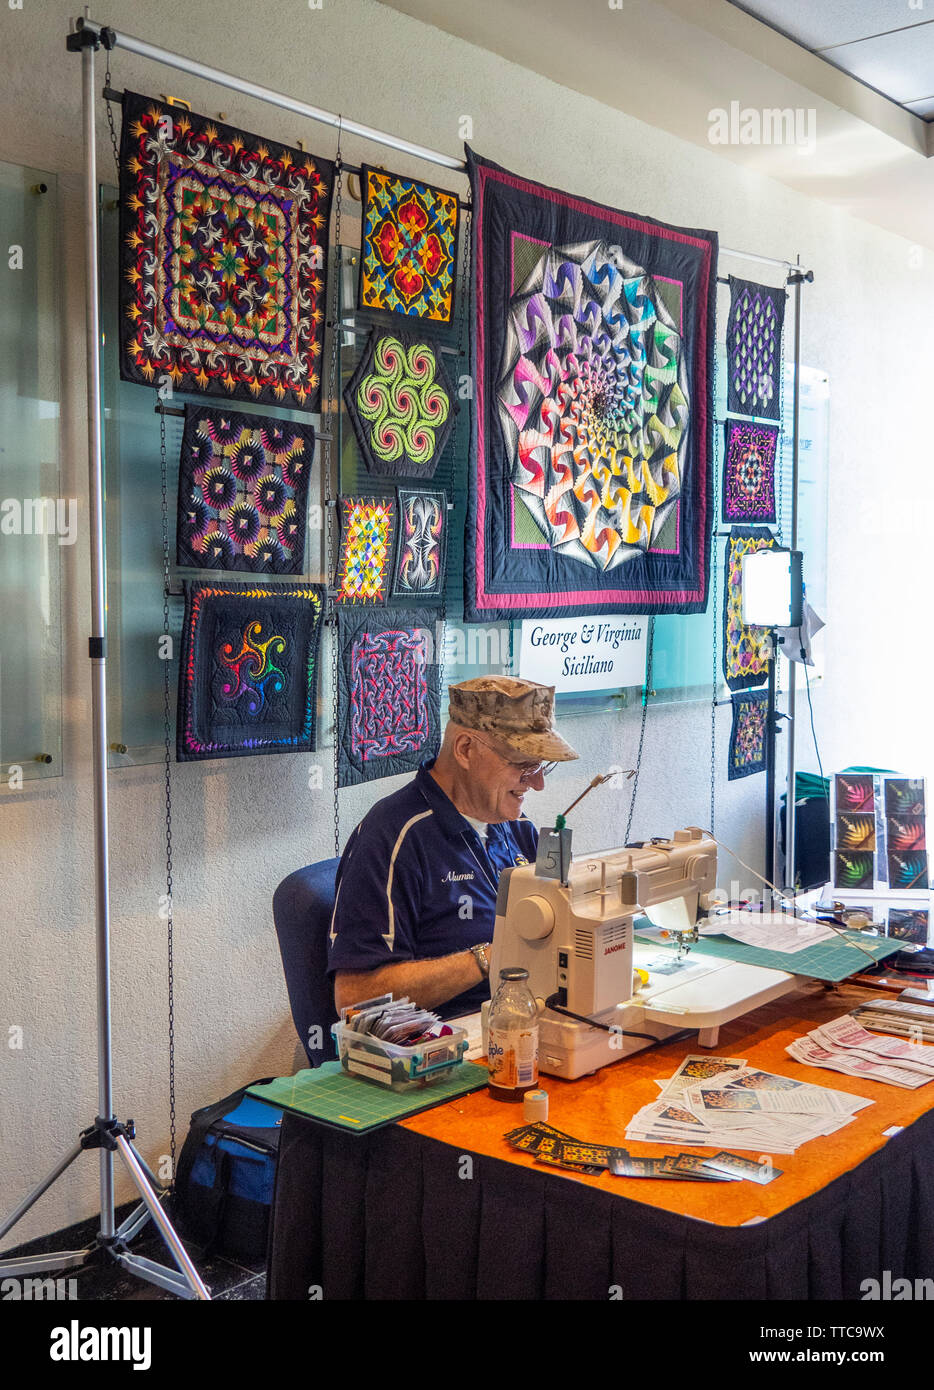 Quiltmaker Siciliano demonstrating quilting at National Quilt